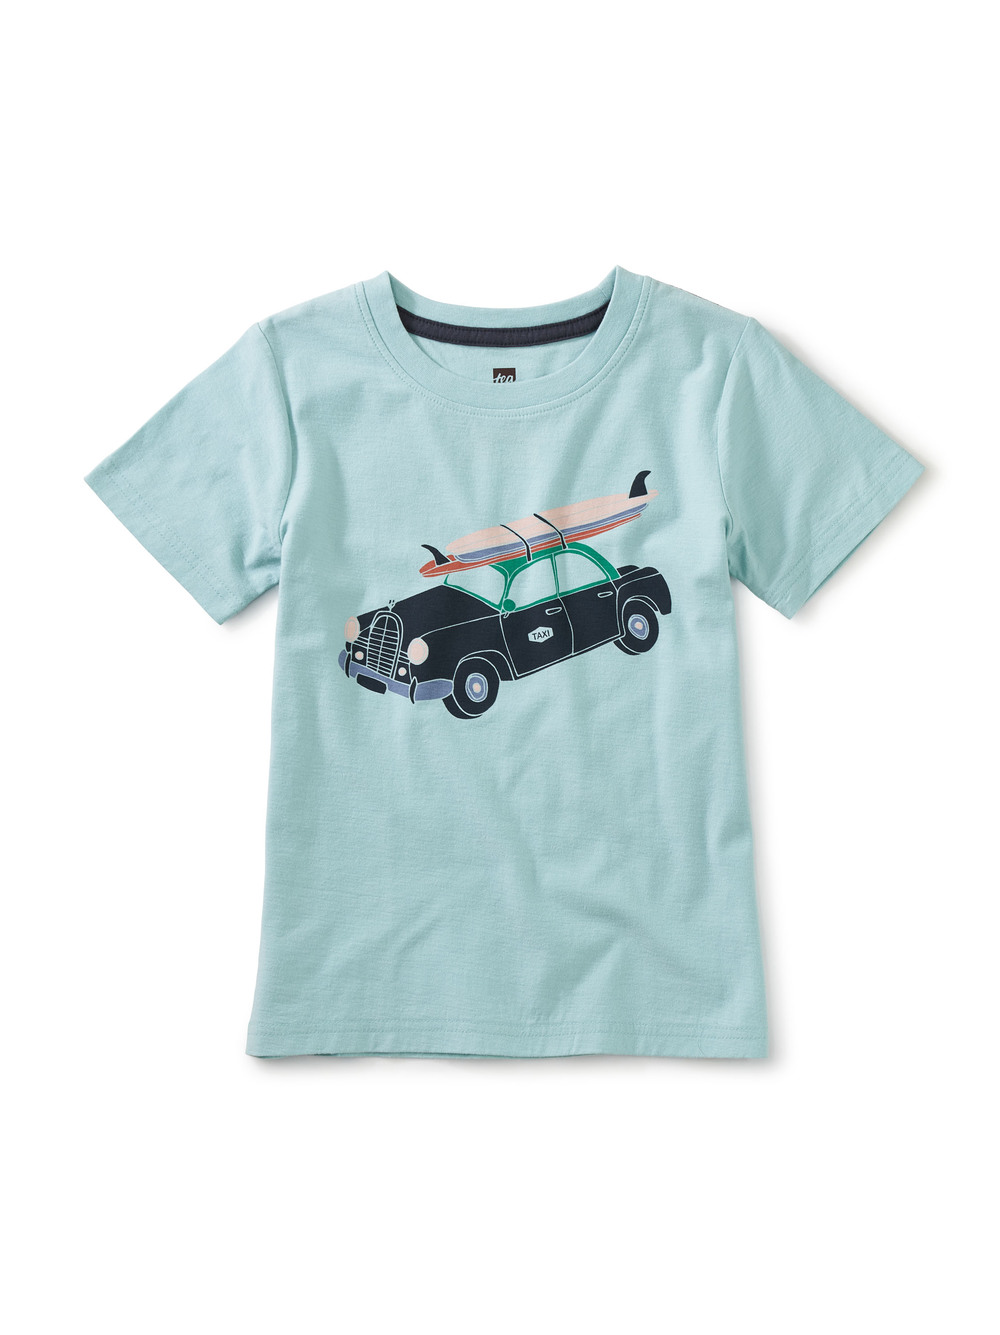 Lizzy Surf Car Graphic Tee